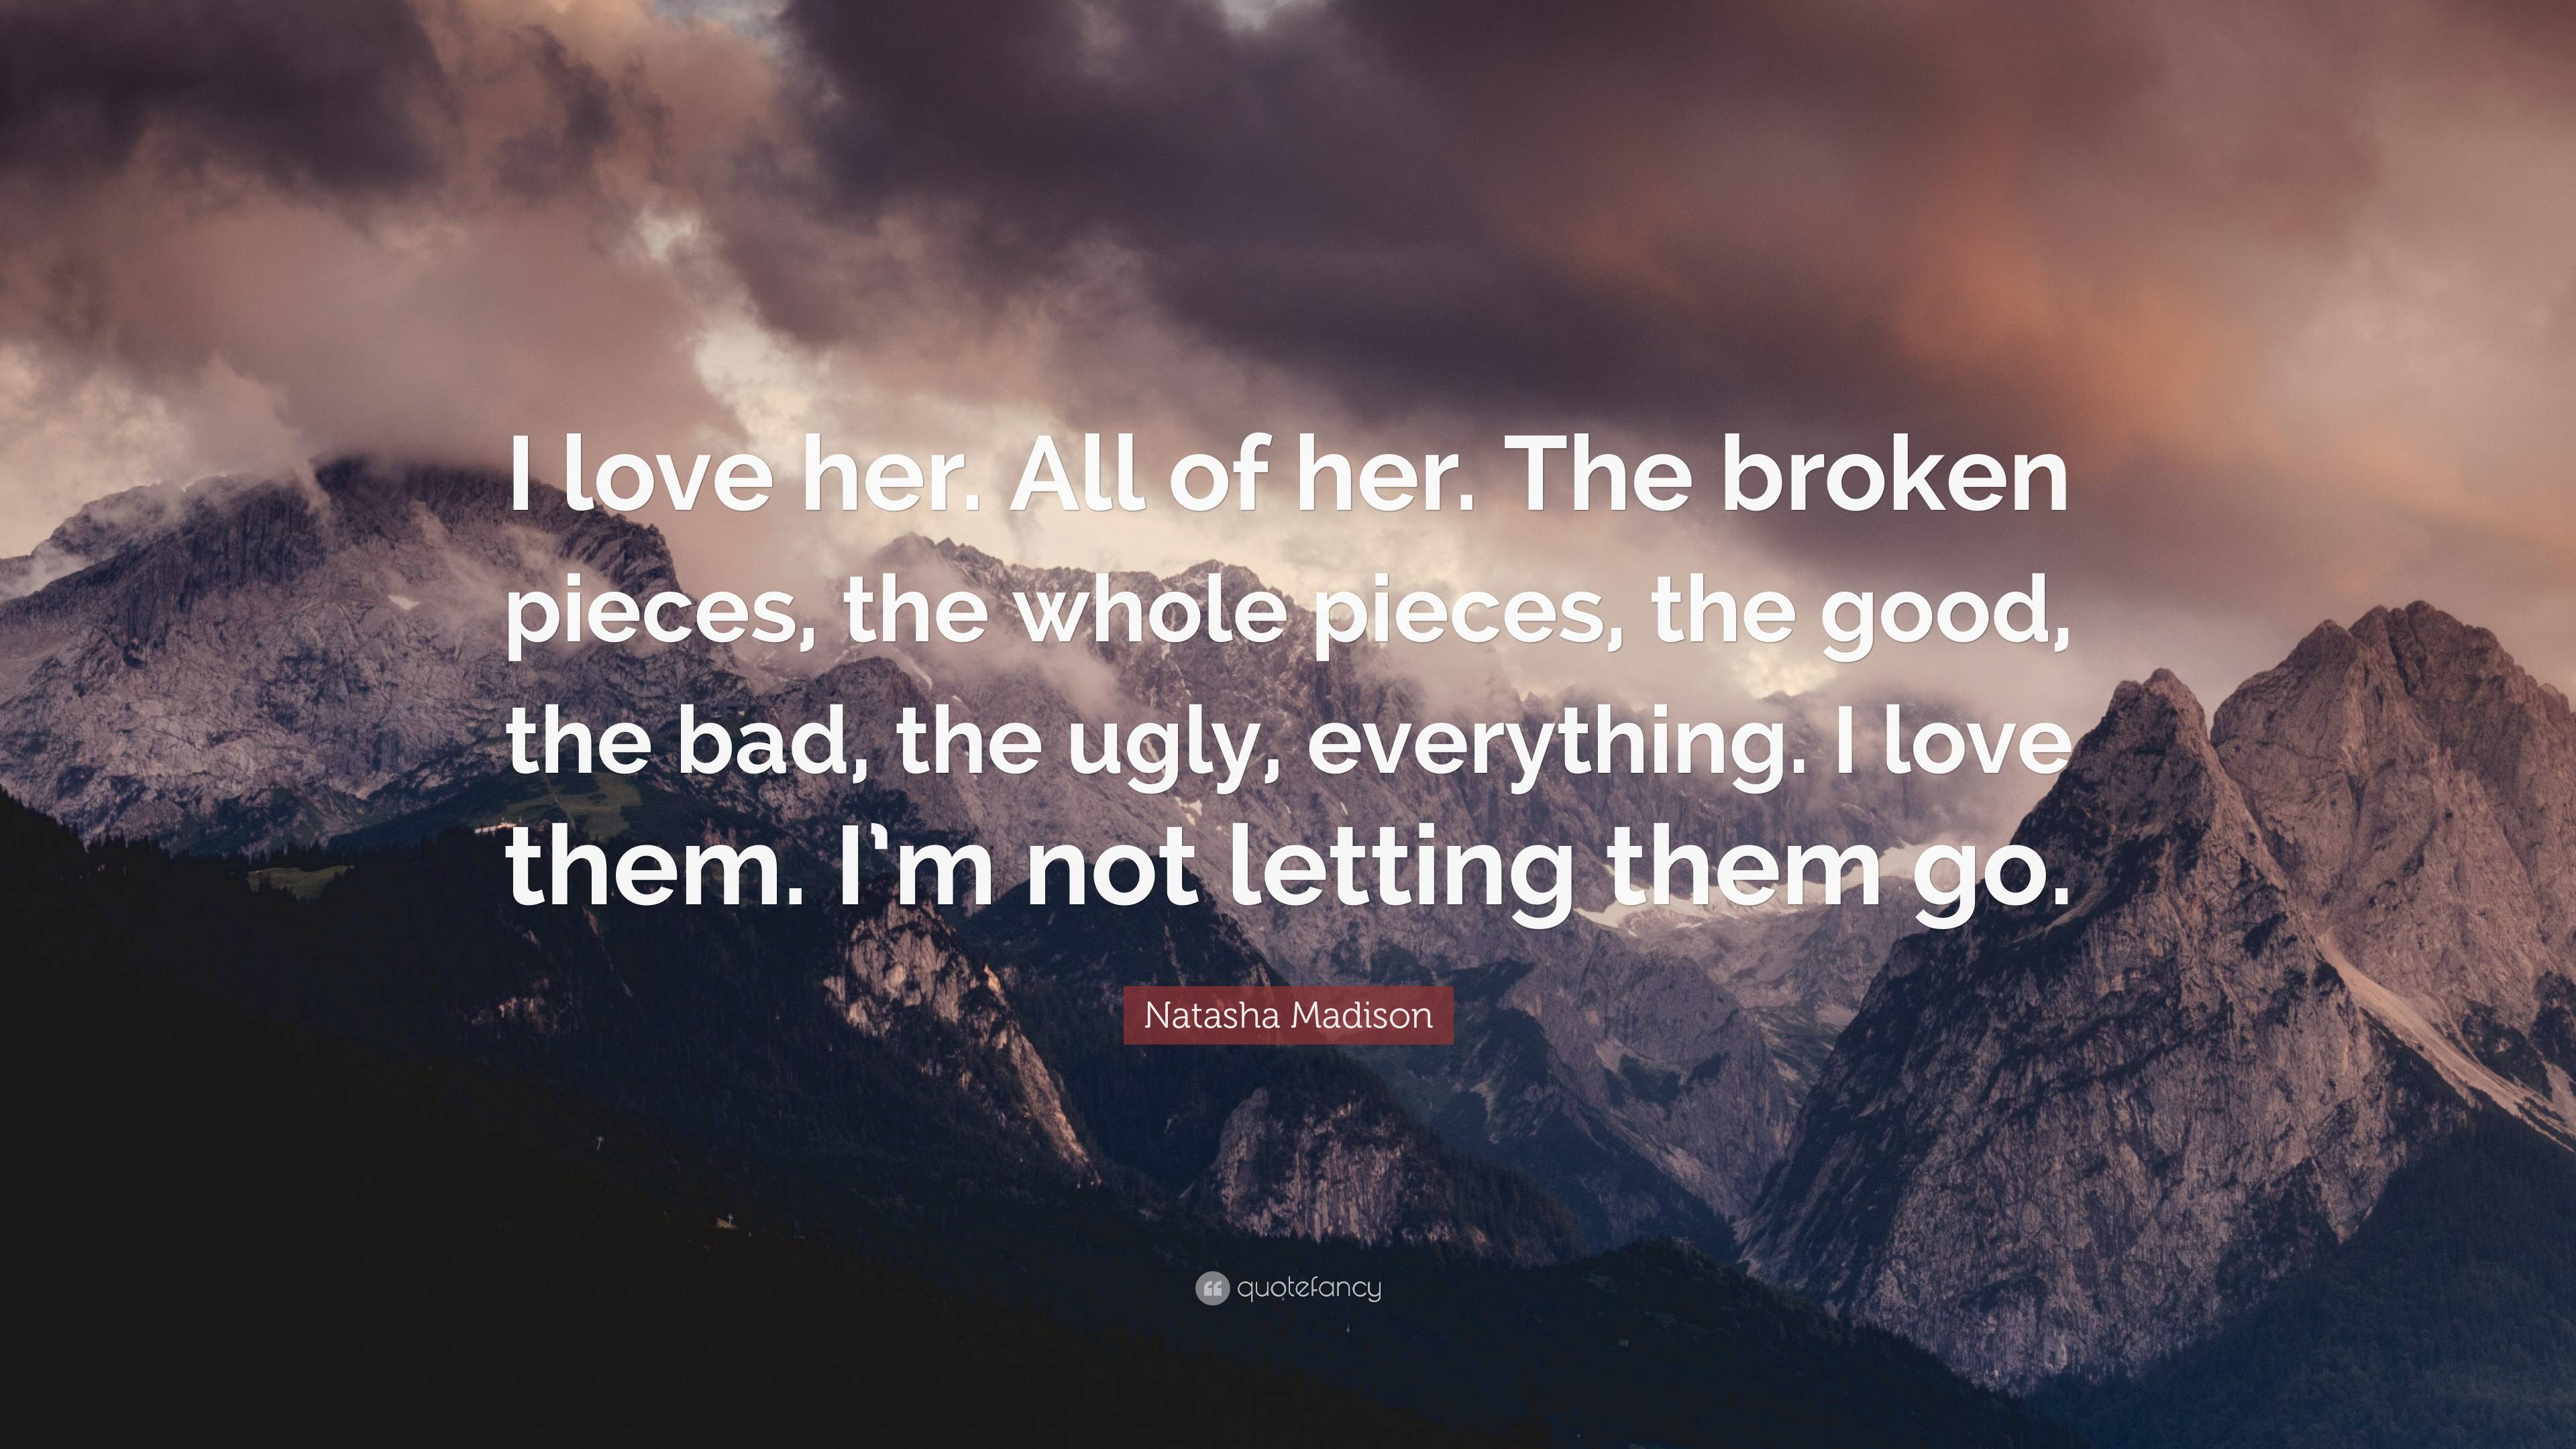 Natasha Madison Quote: “I love her. All of her. The broken pieces, the ...